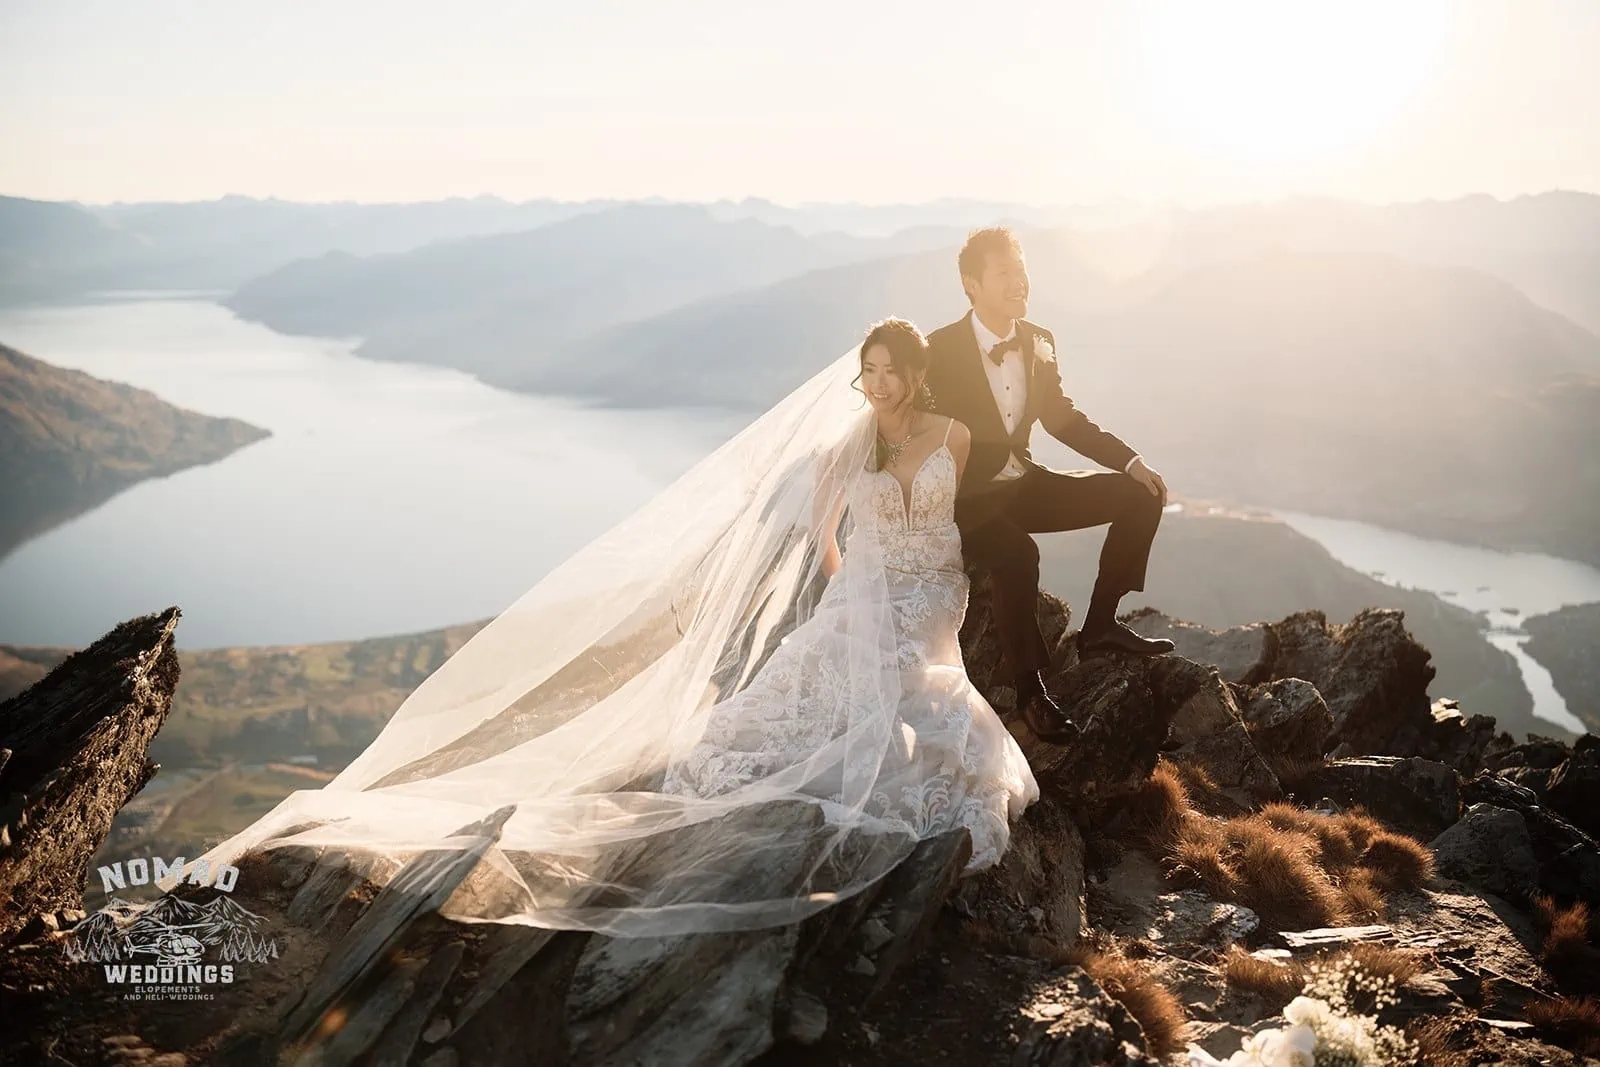 Connie and Andrew have a remarkable pre-wedding shoot on top of The Remarkables overlooking Lake Wanaka.